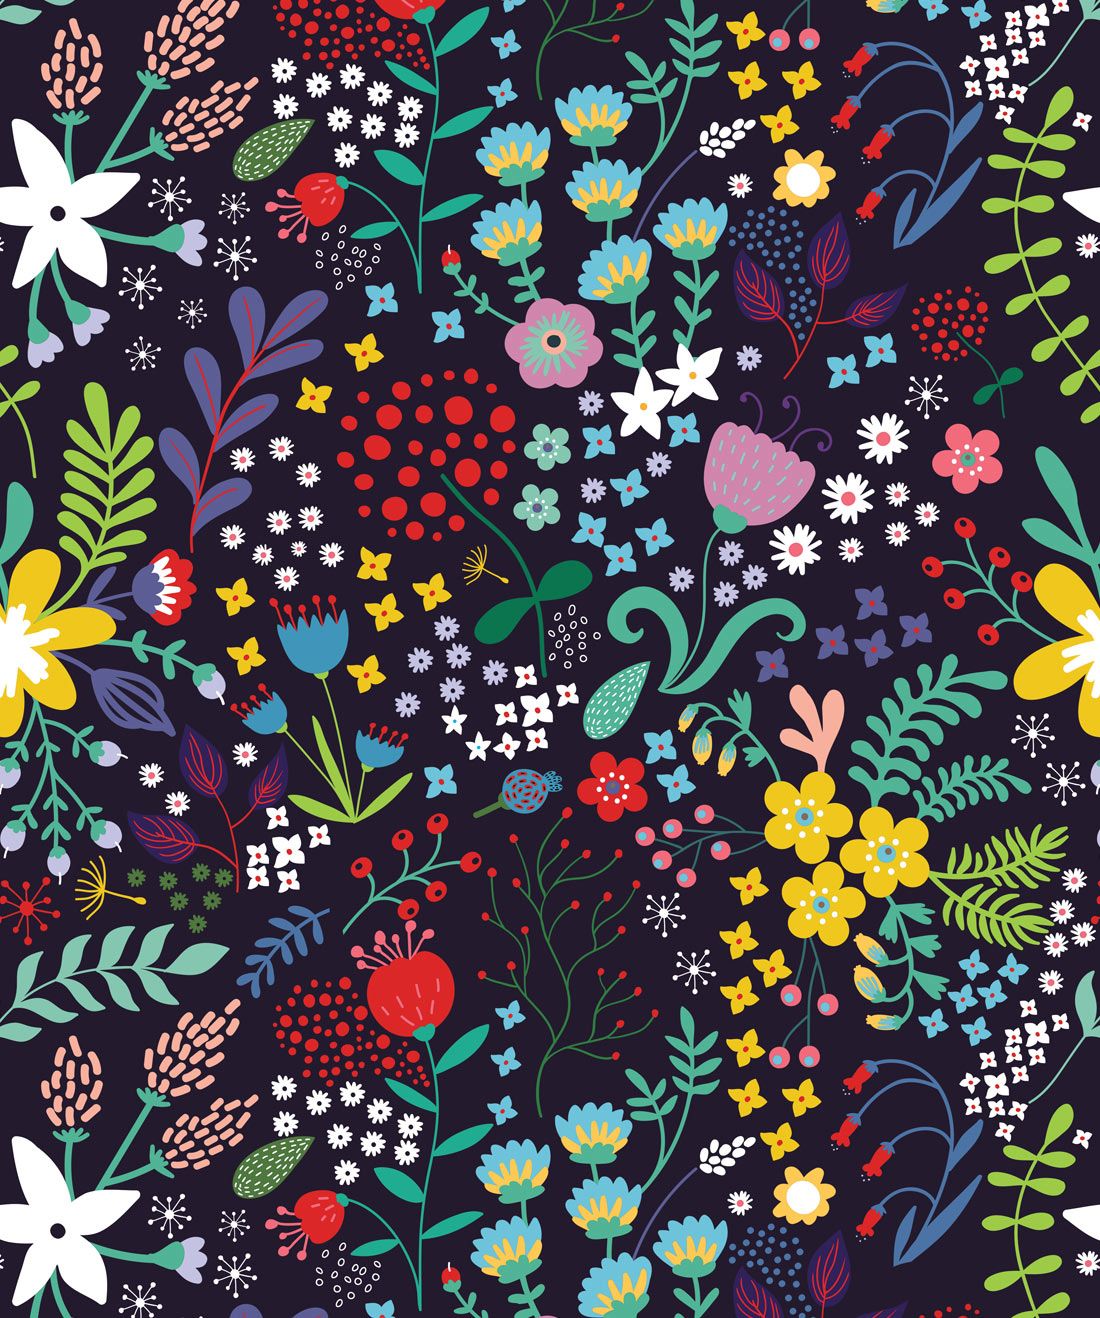 Friday floral is a modern floral wallpaper